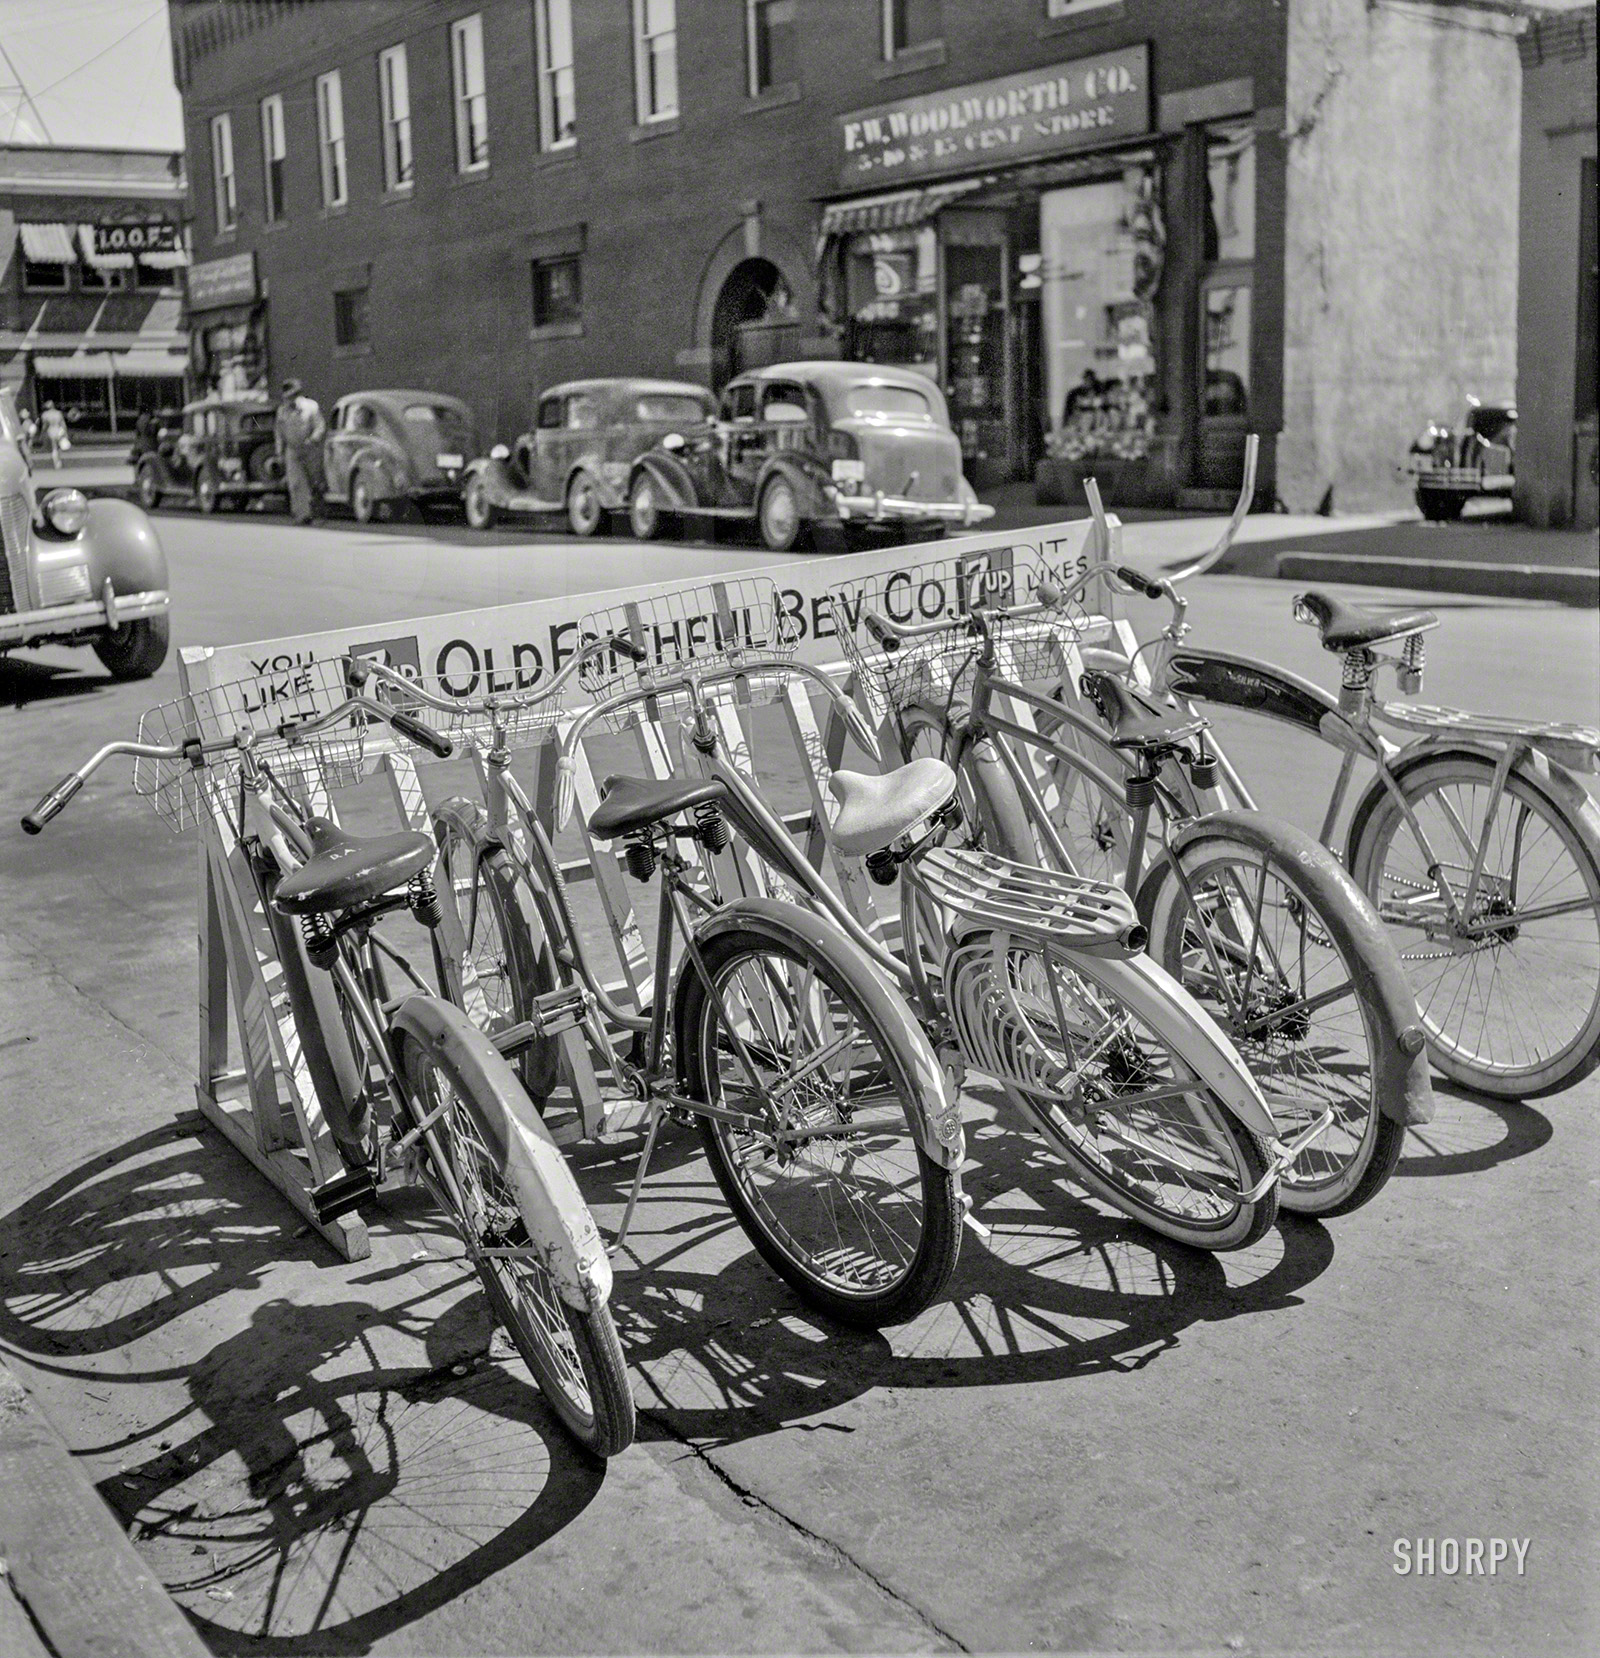 August 1942. "Bike rack in Idaho Falls, Idaho." Brought to you by 7up. Medium format negative by Russell Lee for the Office of War Information. View full size.